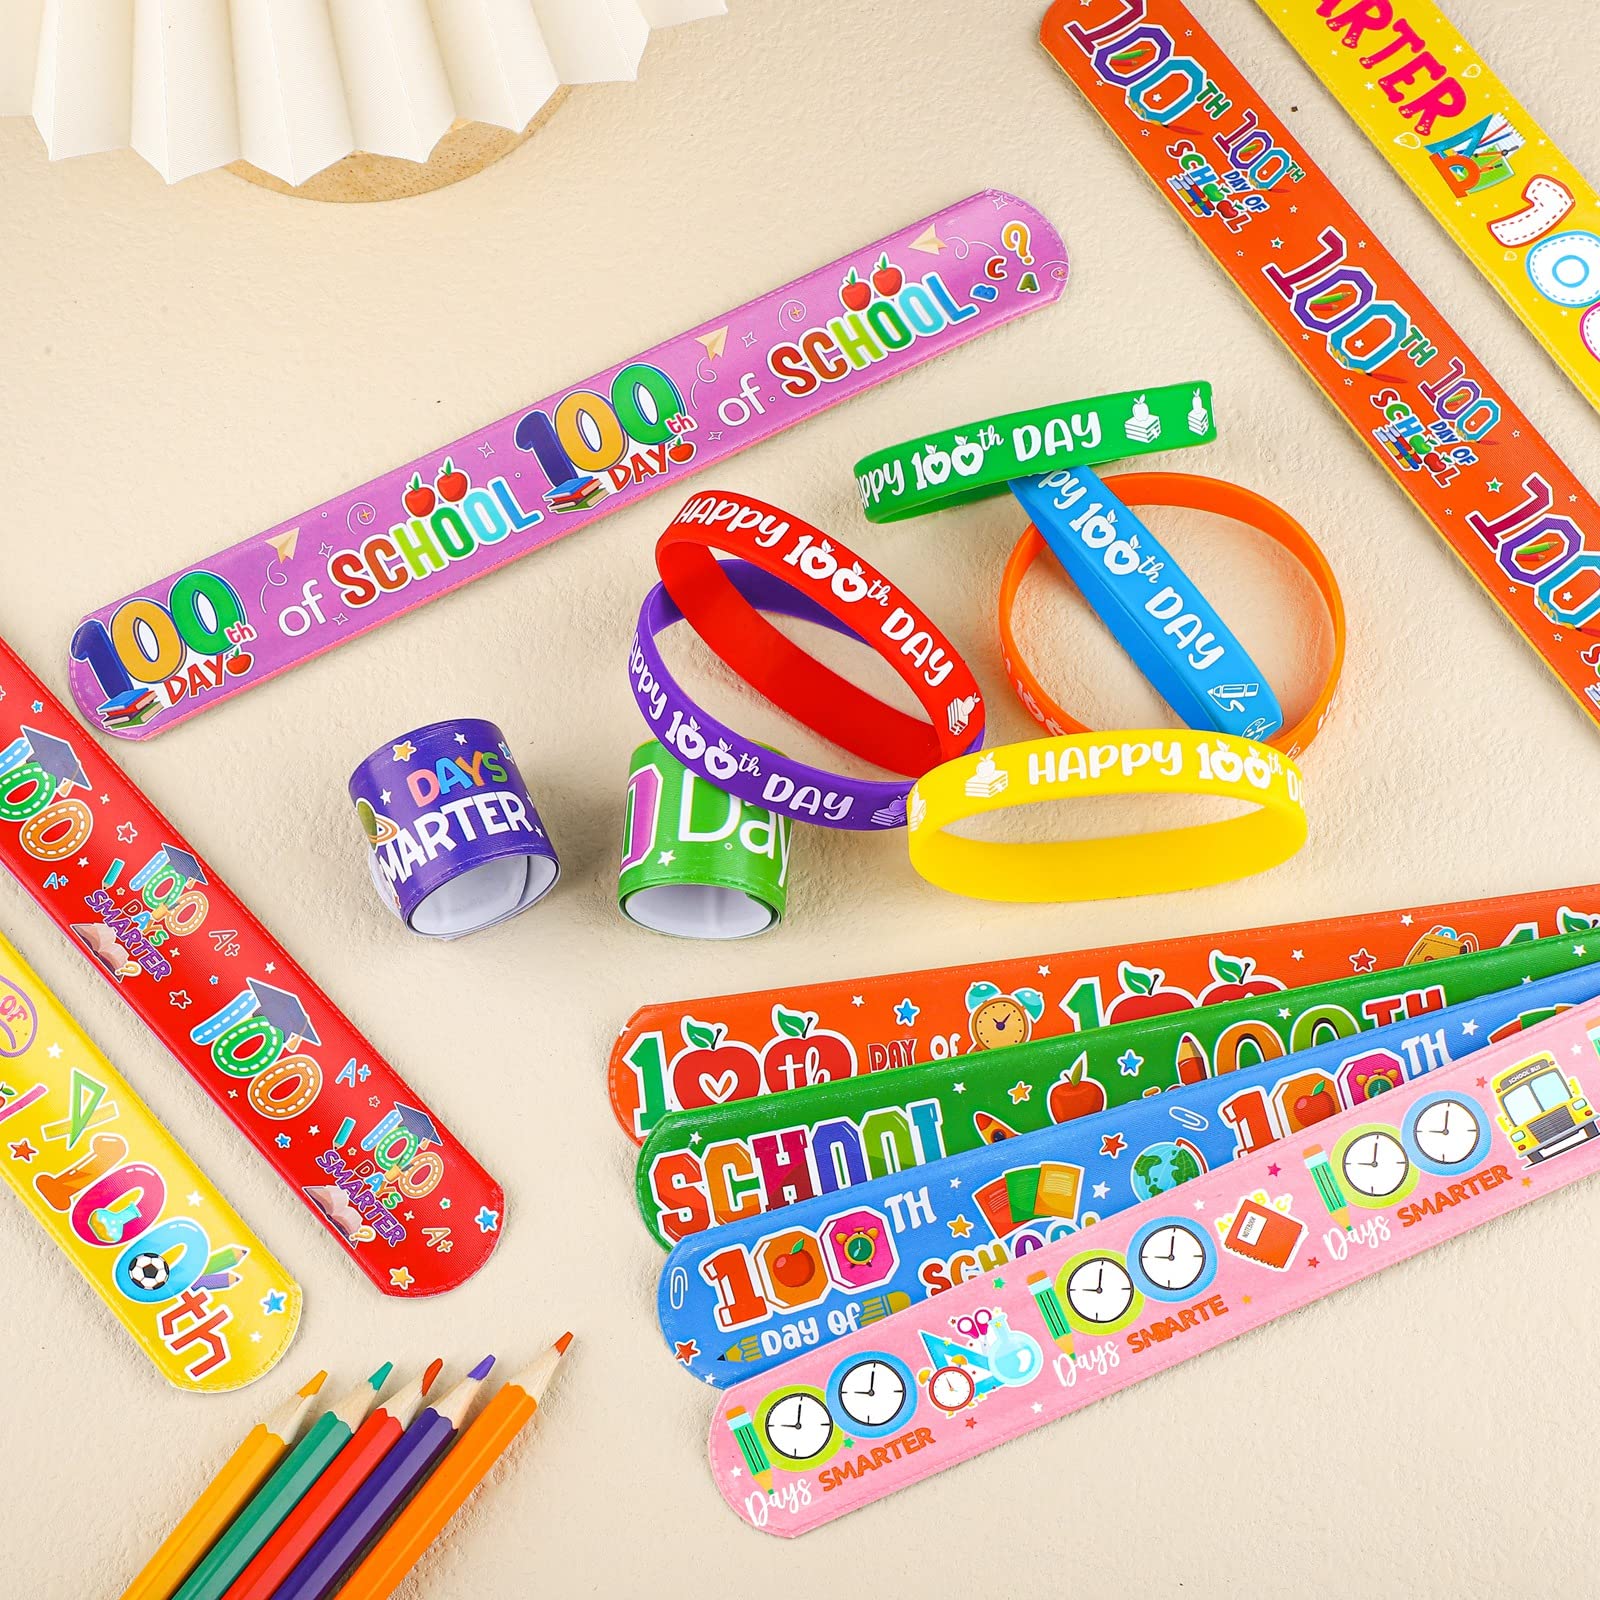 ADXCO 48 Pieces 100th Day of School Slap Bracelets Silicone Wristbands Set School Snap Slip Wristbands Accessories for School Party Favors Classroom Prizes Birthday Gifts, 18 Assorted Styles